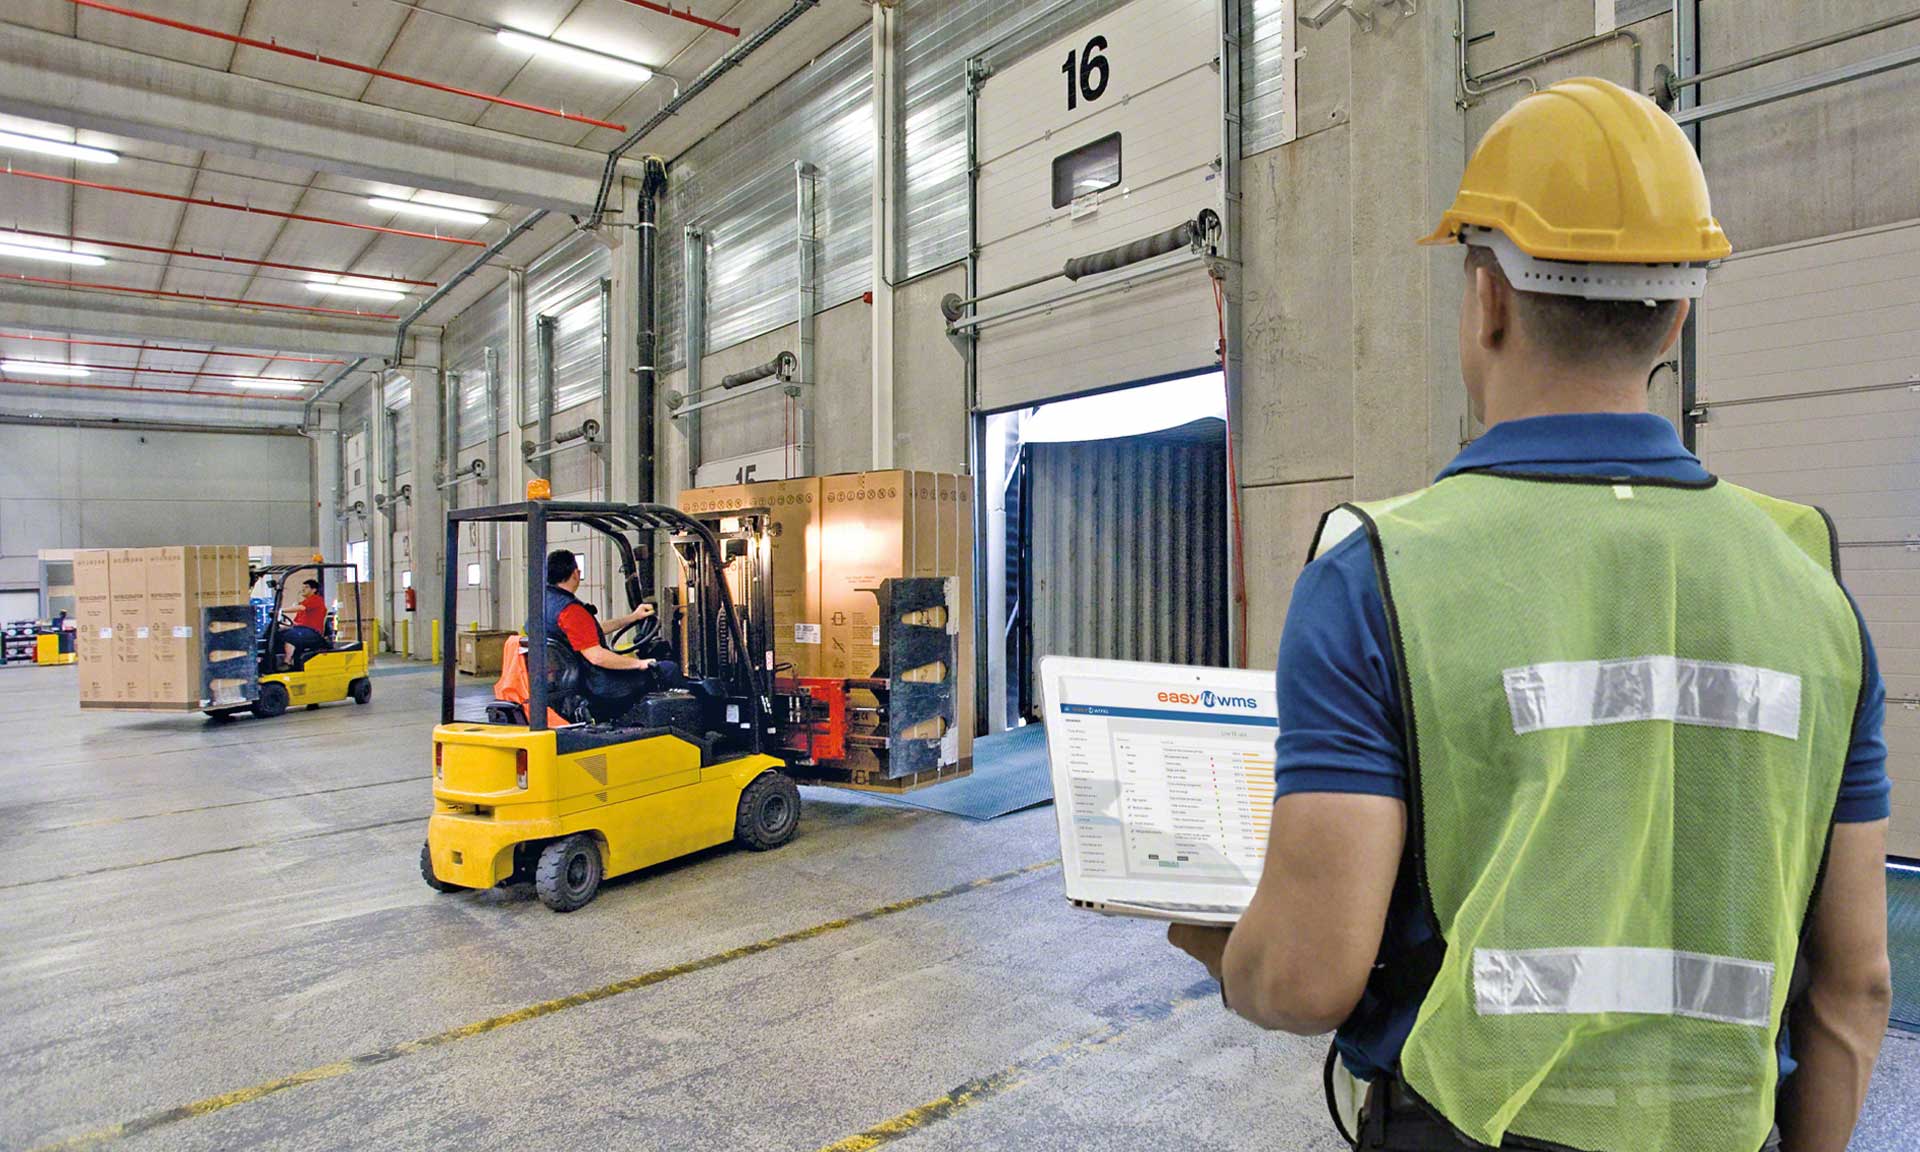 The 3PL provider will digitalize its four warehouses in France